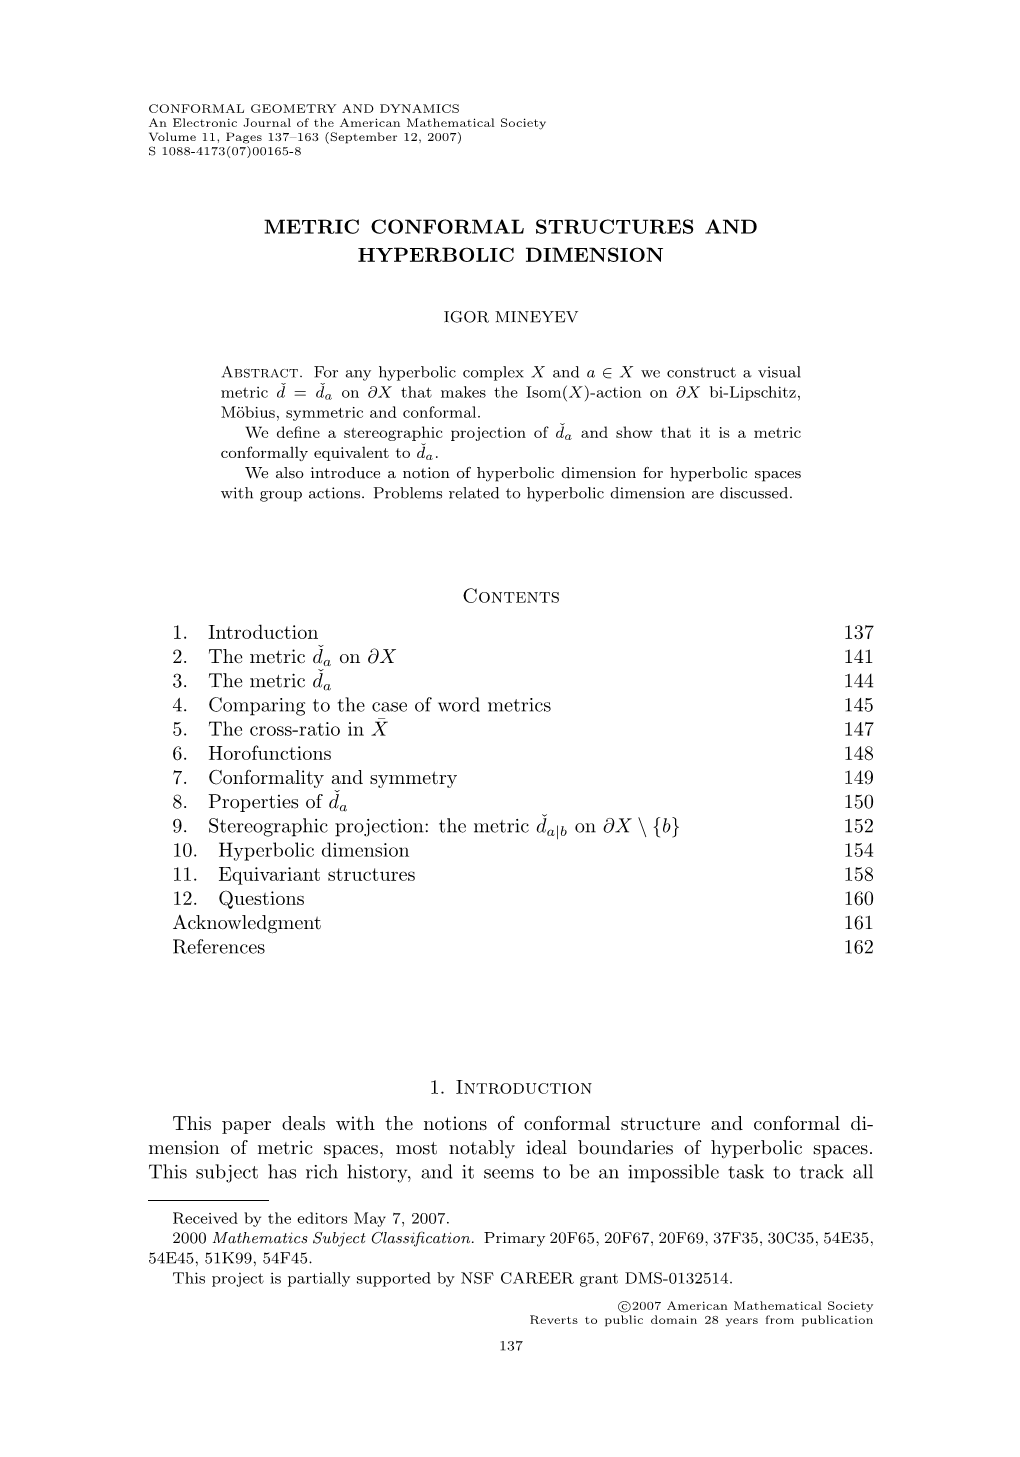 Metric Conformal Structures and Hyperbolic Dimension